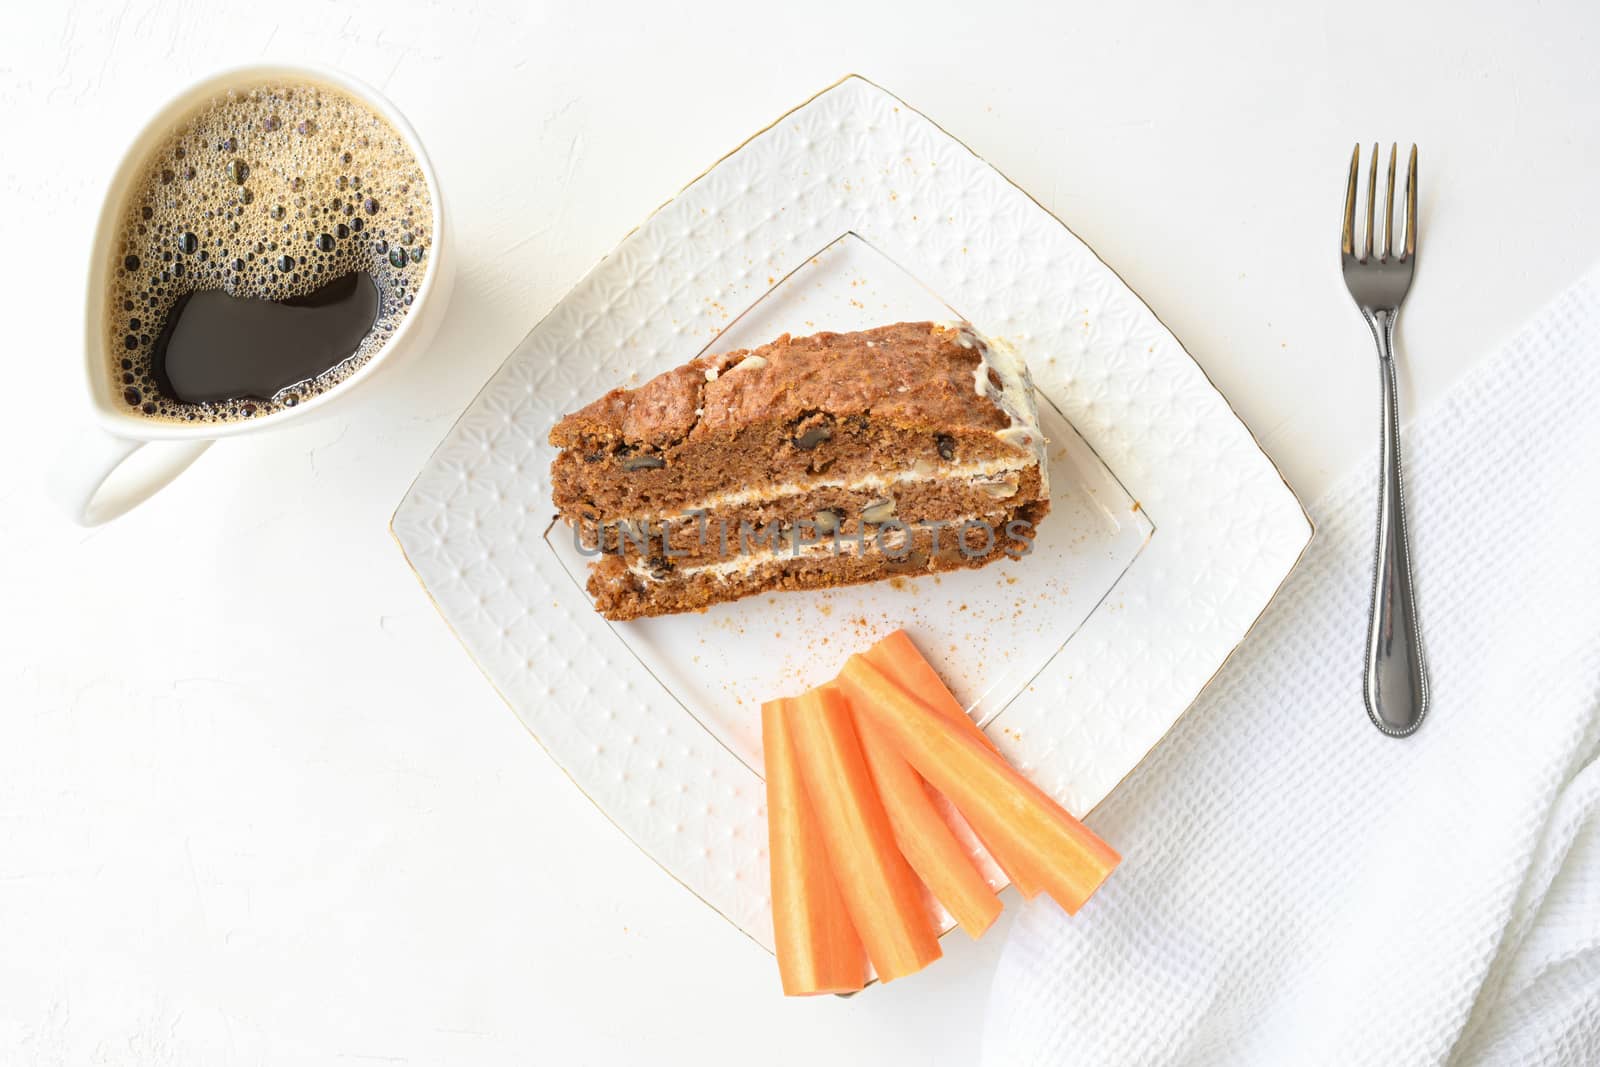 Slice of carrot cake and coffee on white background by sashokddt